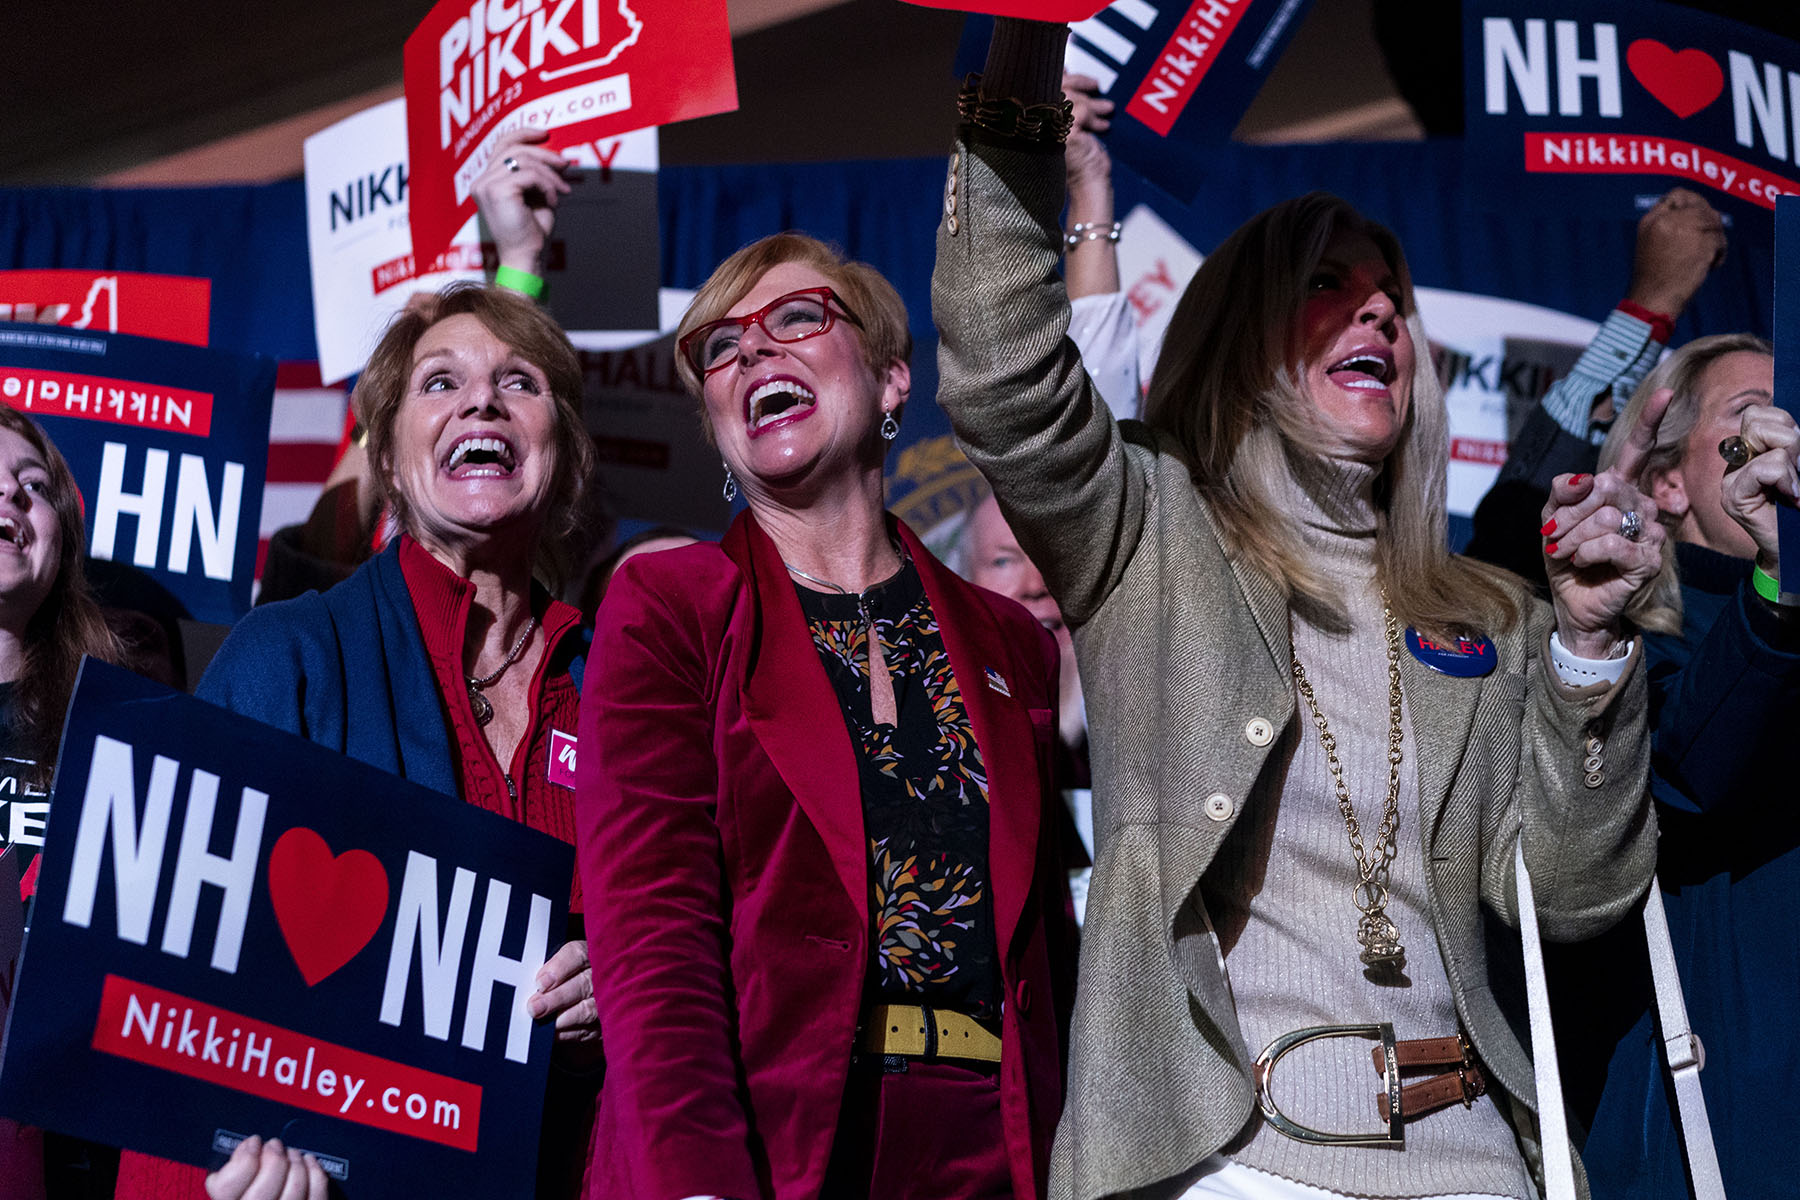 Nikki Haley supporters cheer her on while she speaks during an election night party.